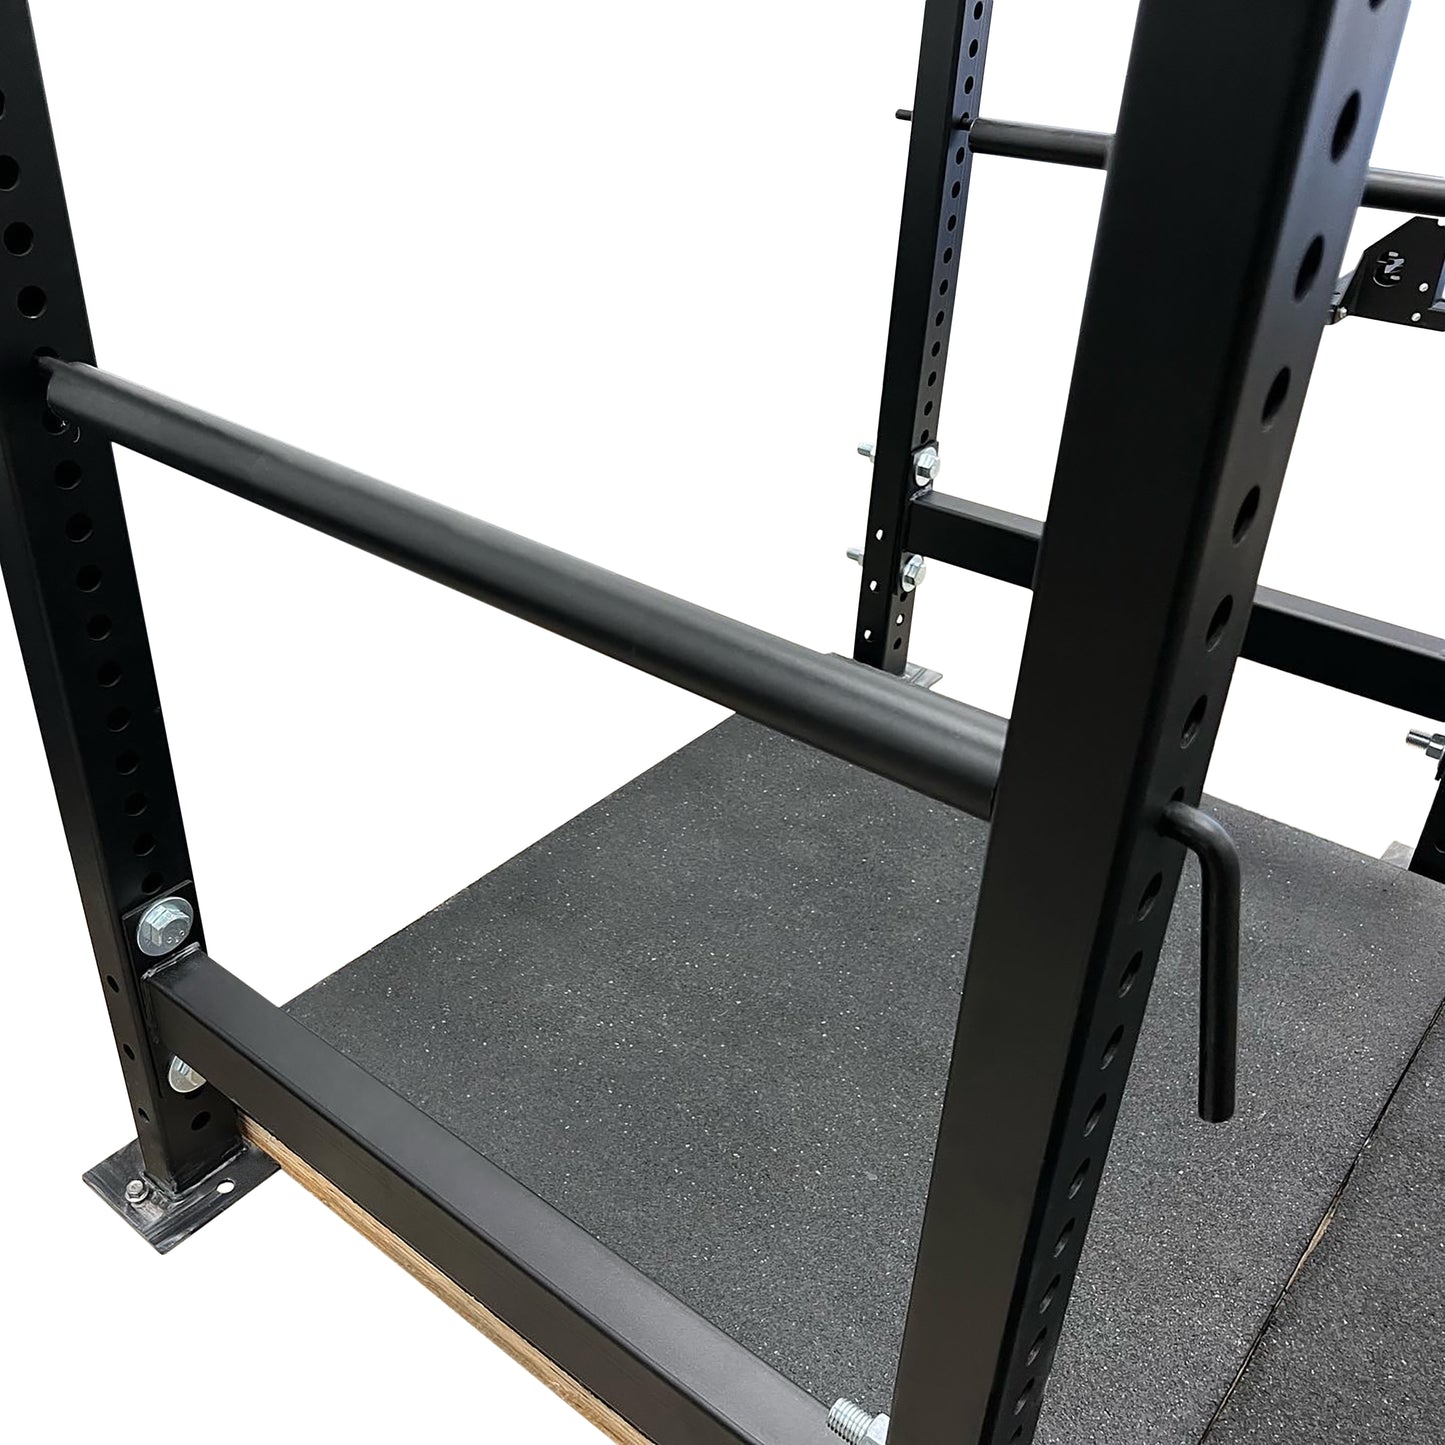 USA Power Squat Rack - "The General"